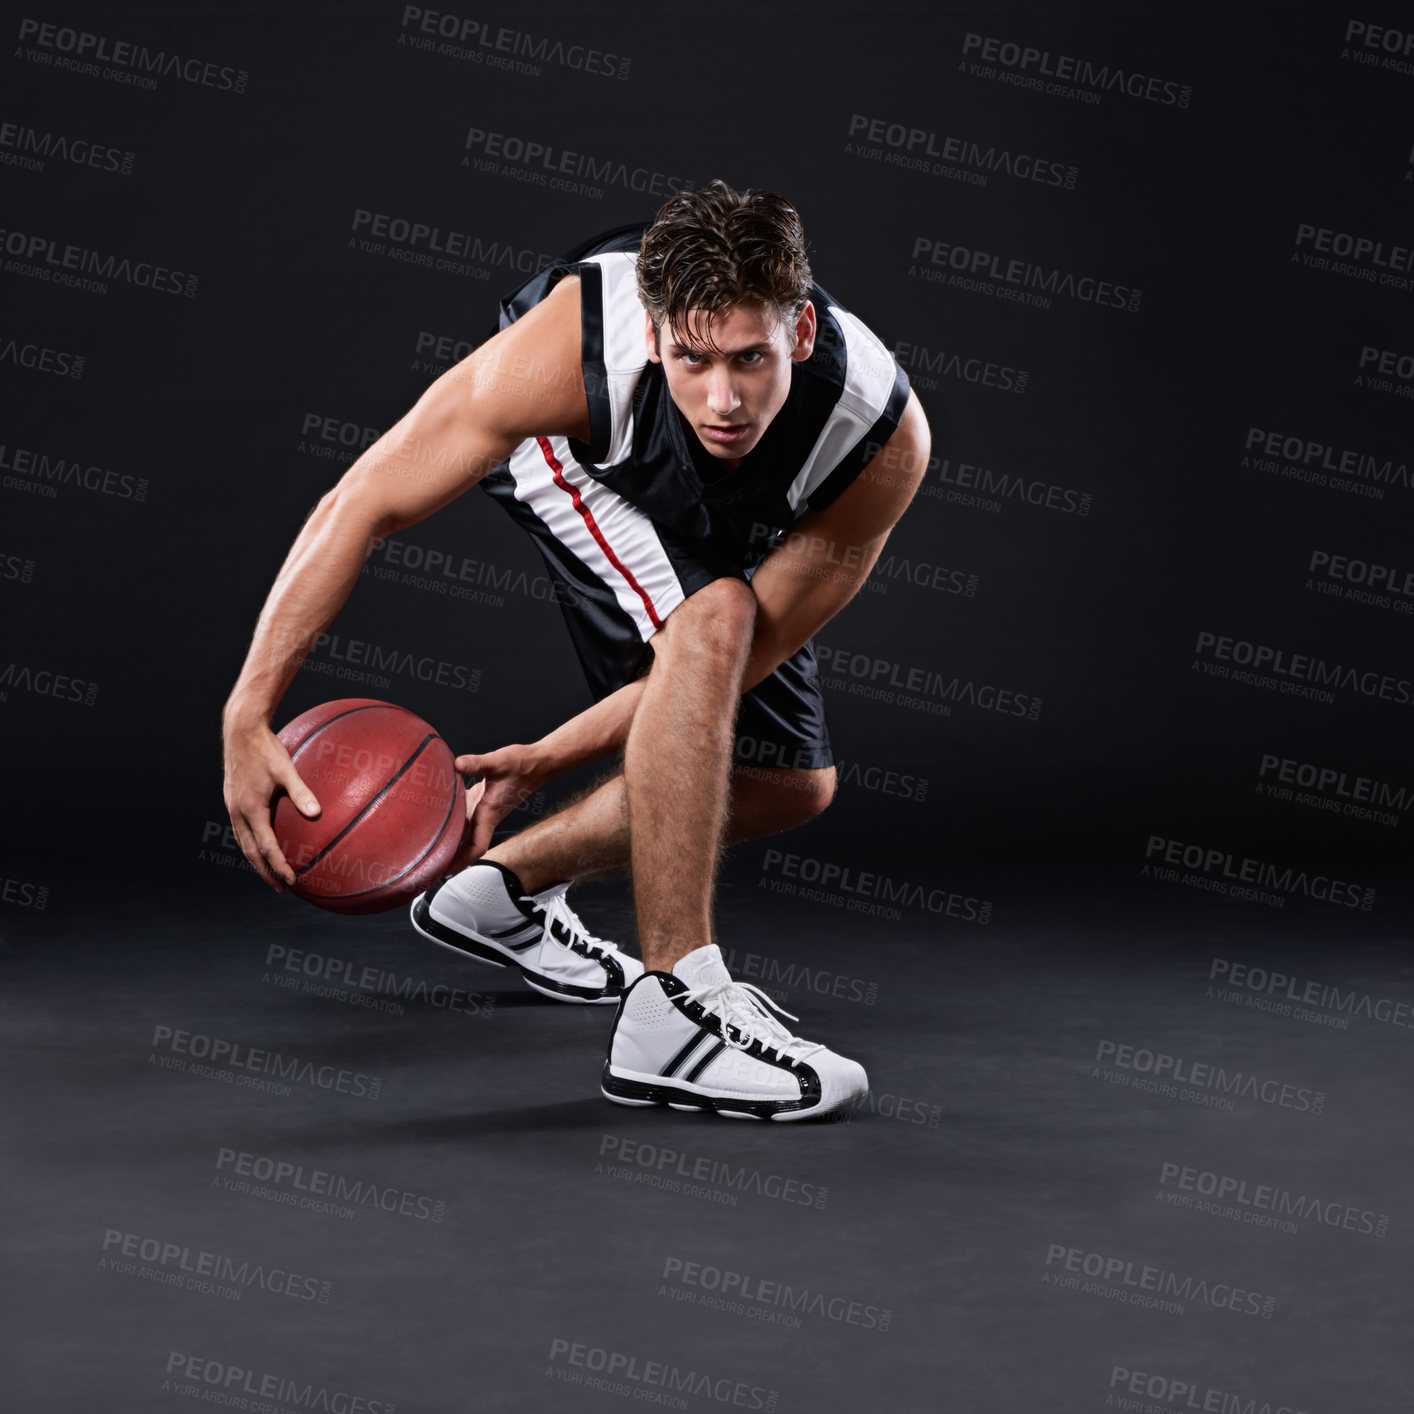 Buy stock photo Full length portrait of a male basketball player in action against a black background